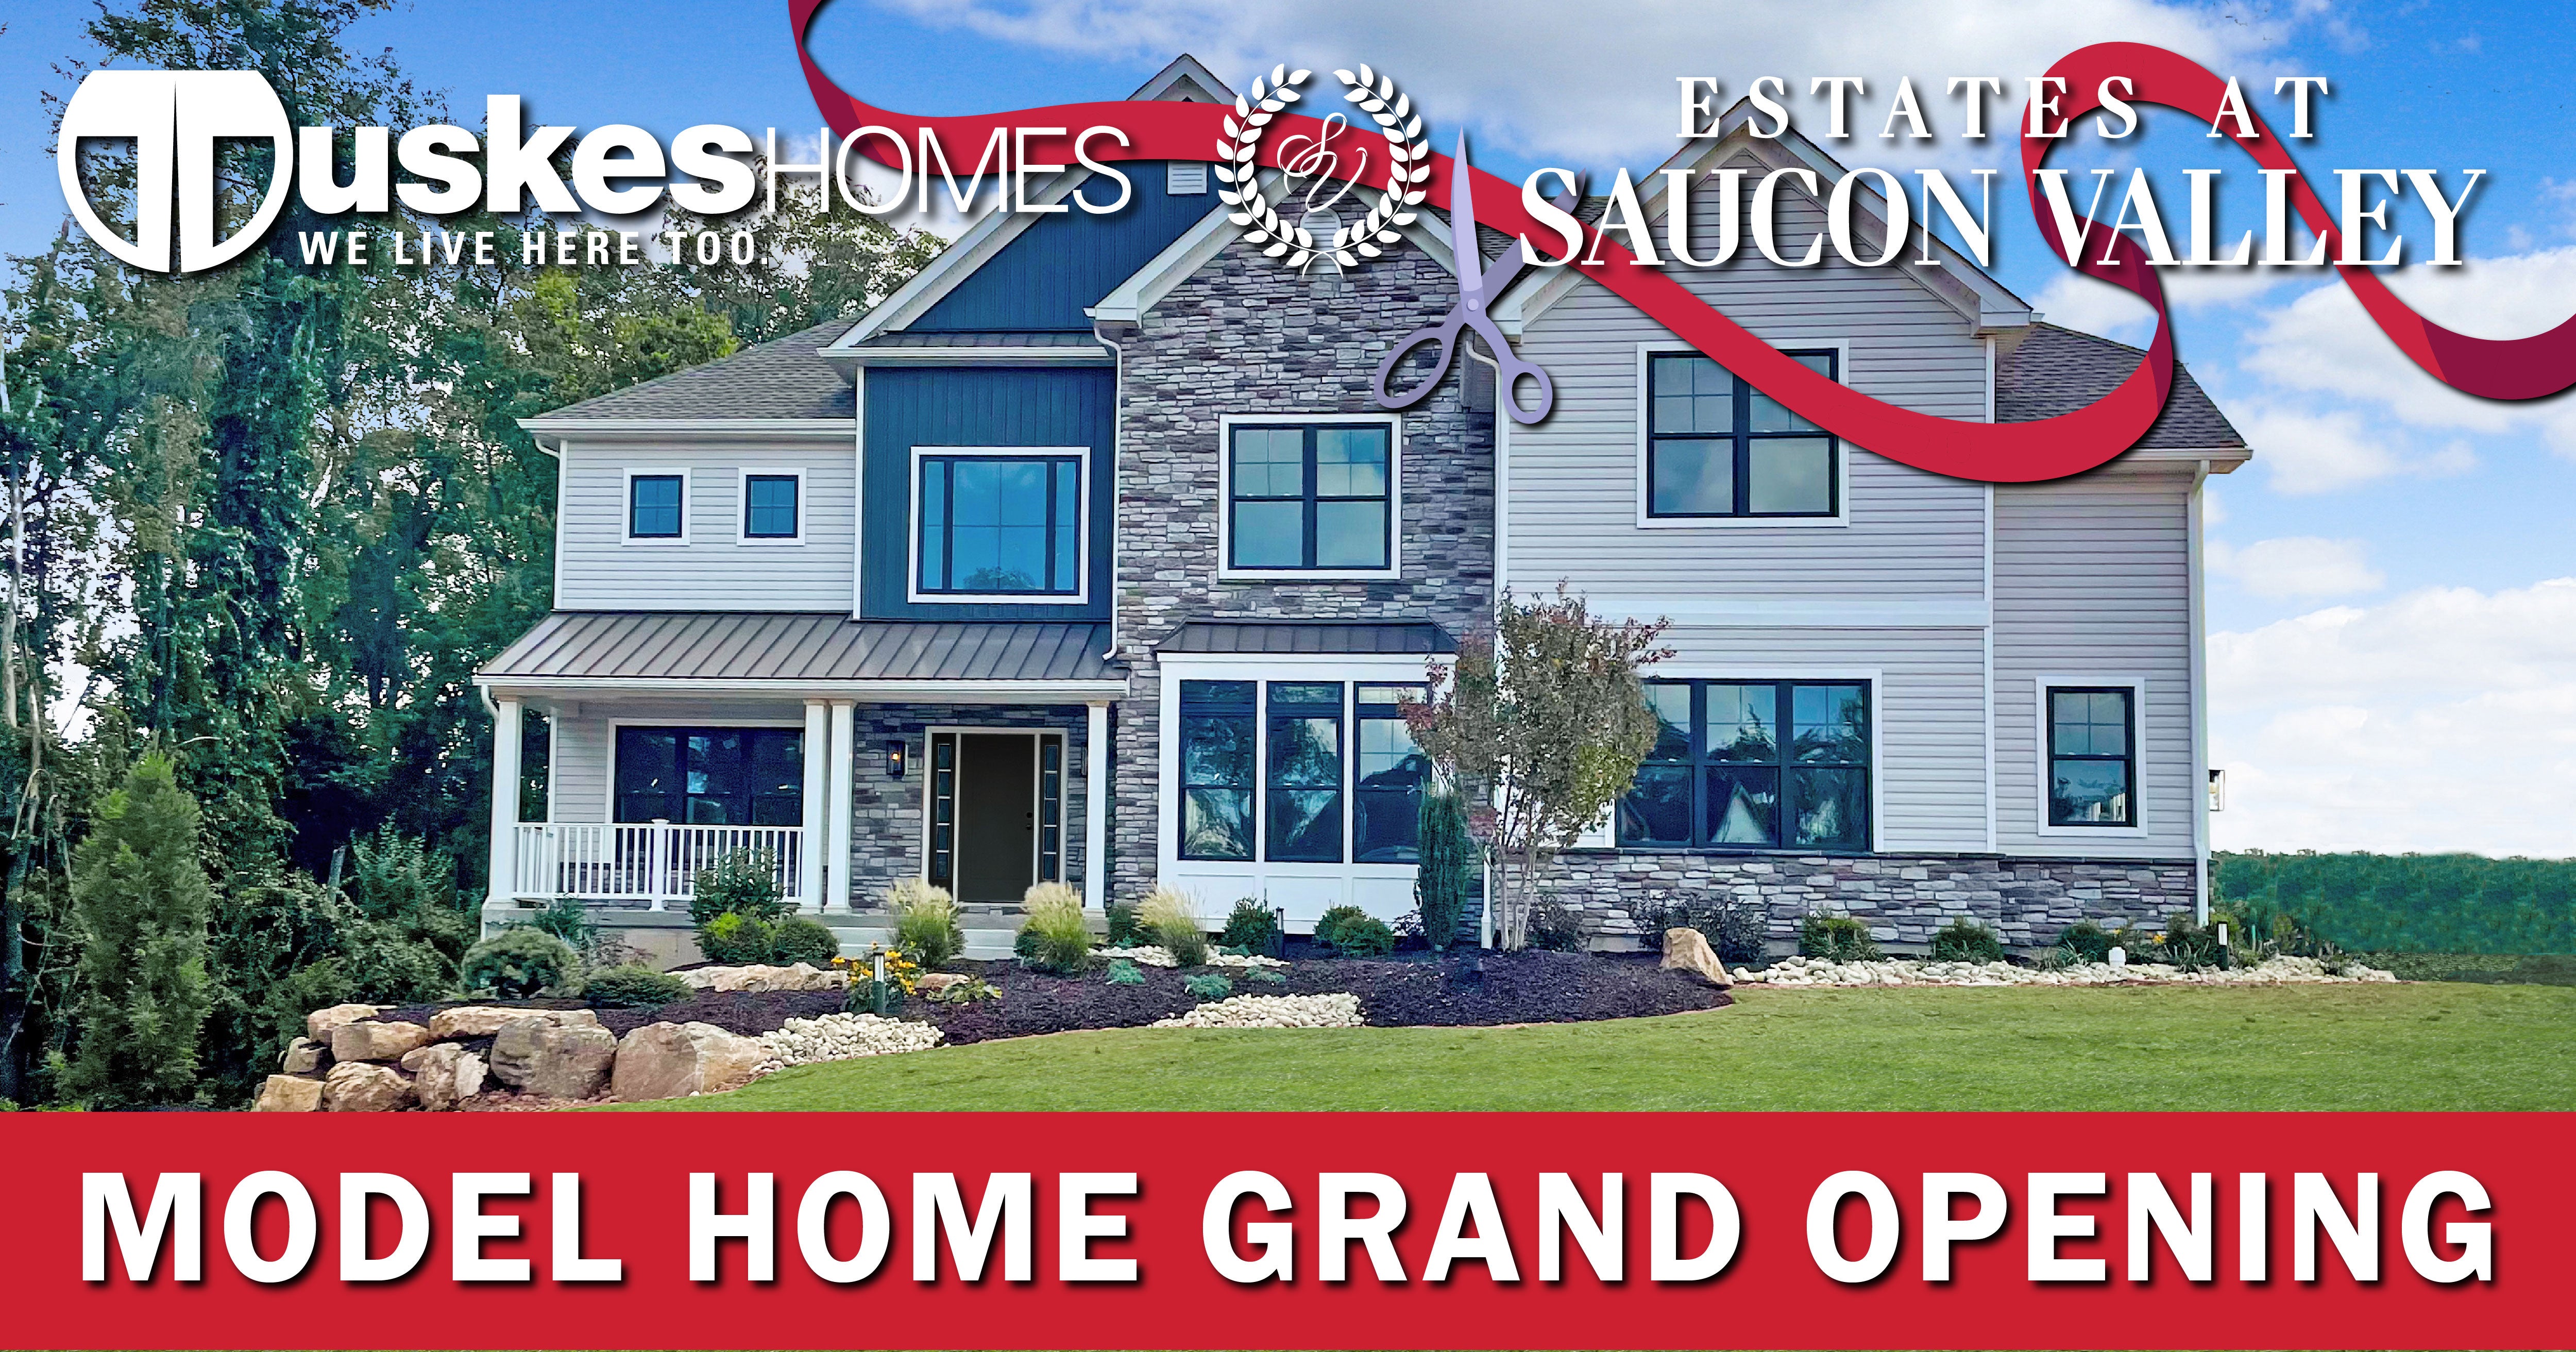 Join us at the Grand Opening of our new Model Home!